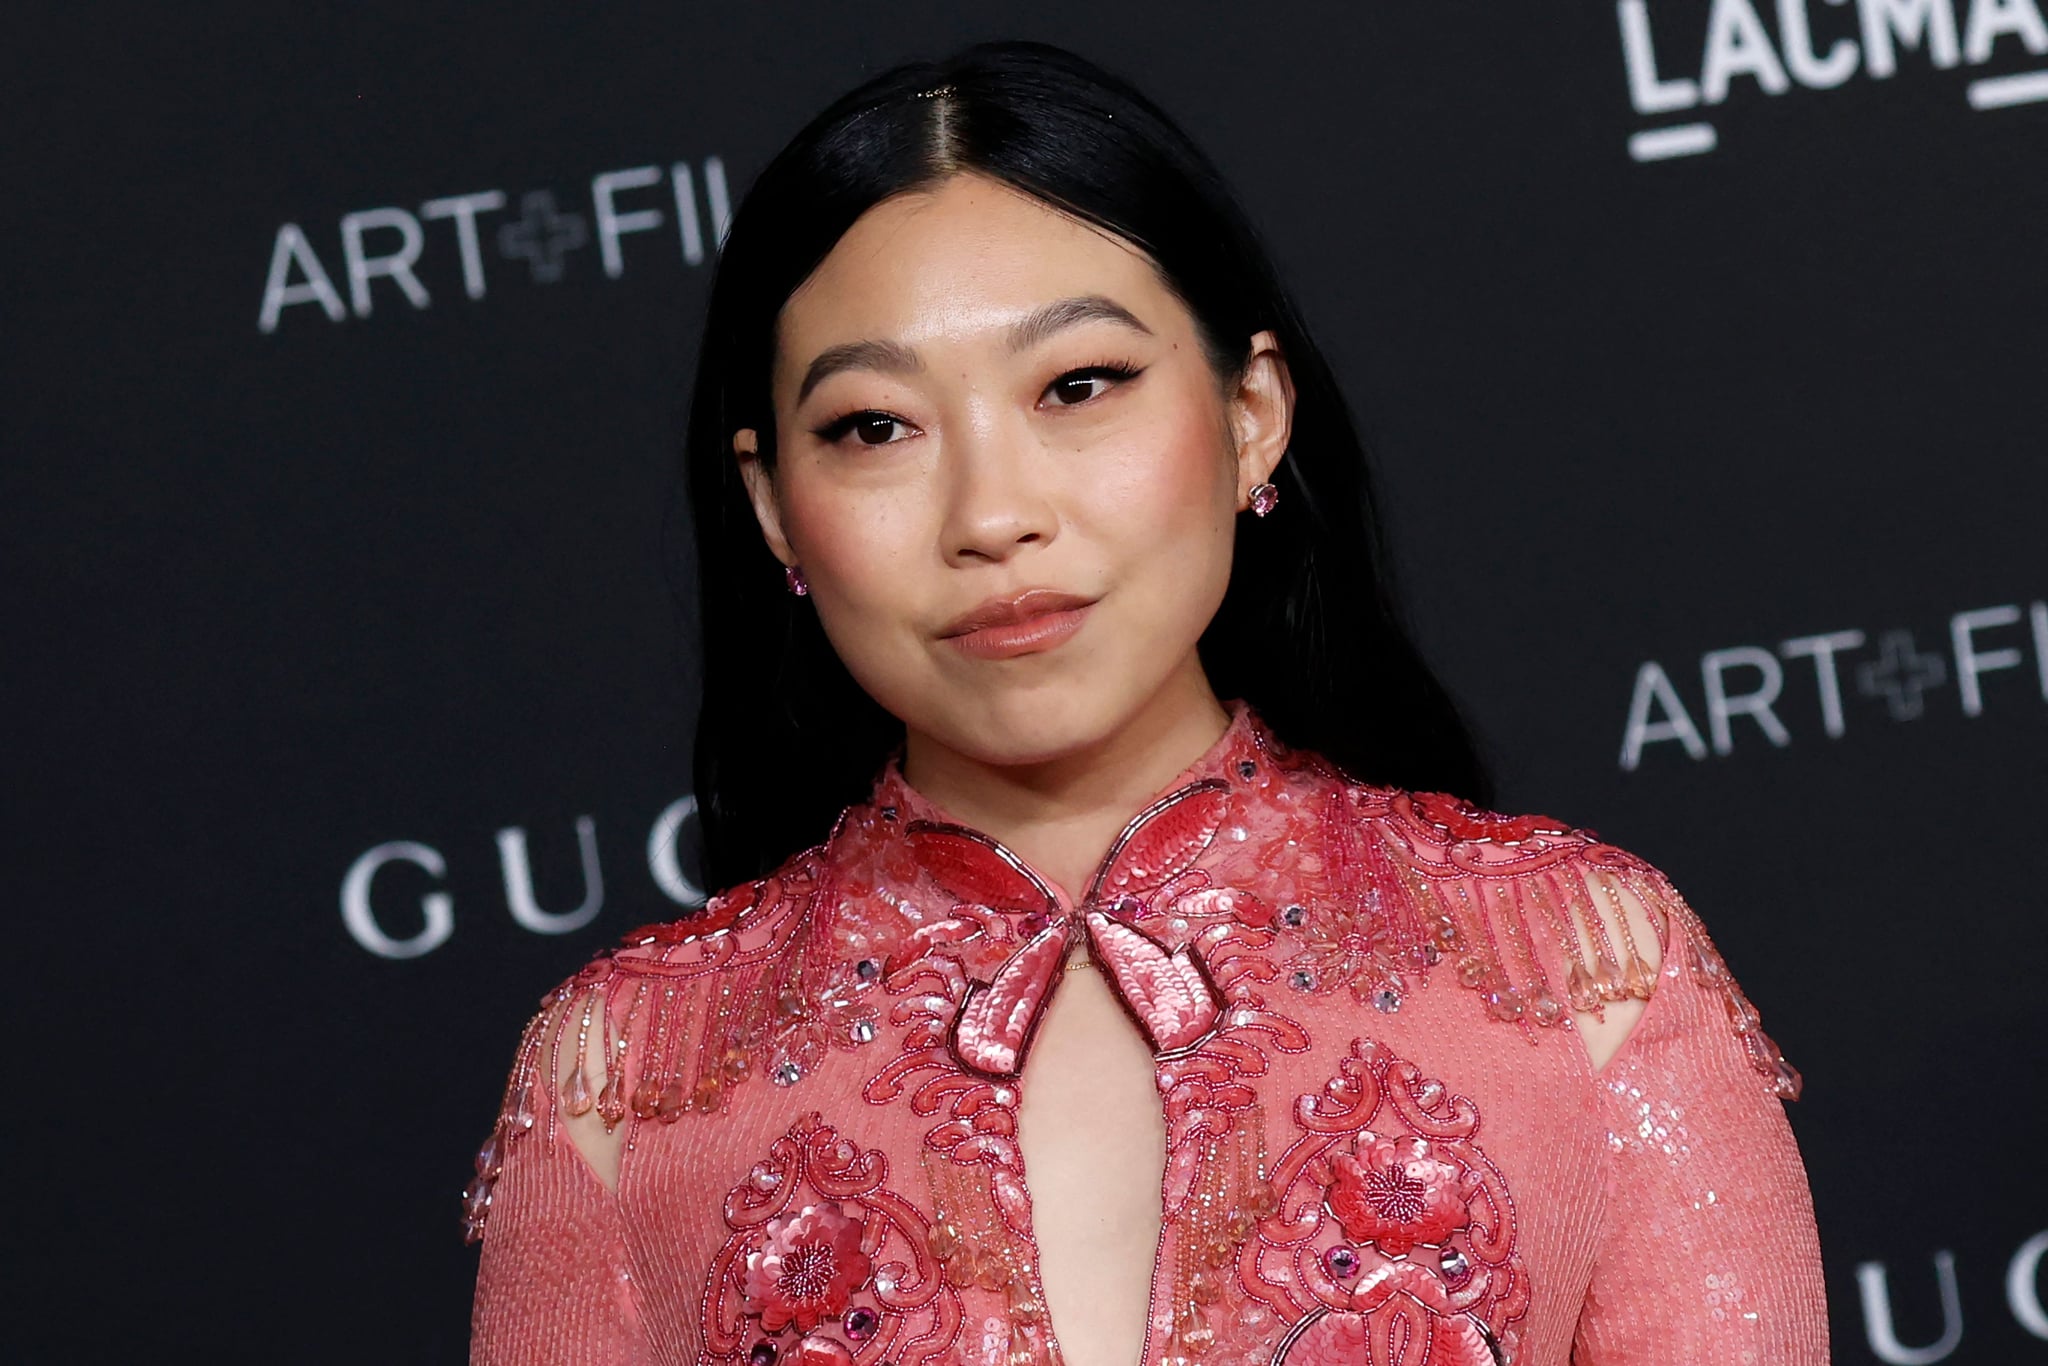 US actress Awkwafina arrives for the 10th annual LACMA Art+Film gala at the Los Angeles County Museum of Art (LACMA) in Los Angeles, California on November 6, 2021. (Photo by Michael Tran / AFP) (Photo by MICHAEL TRAN/AFP via Getty Images)